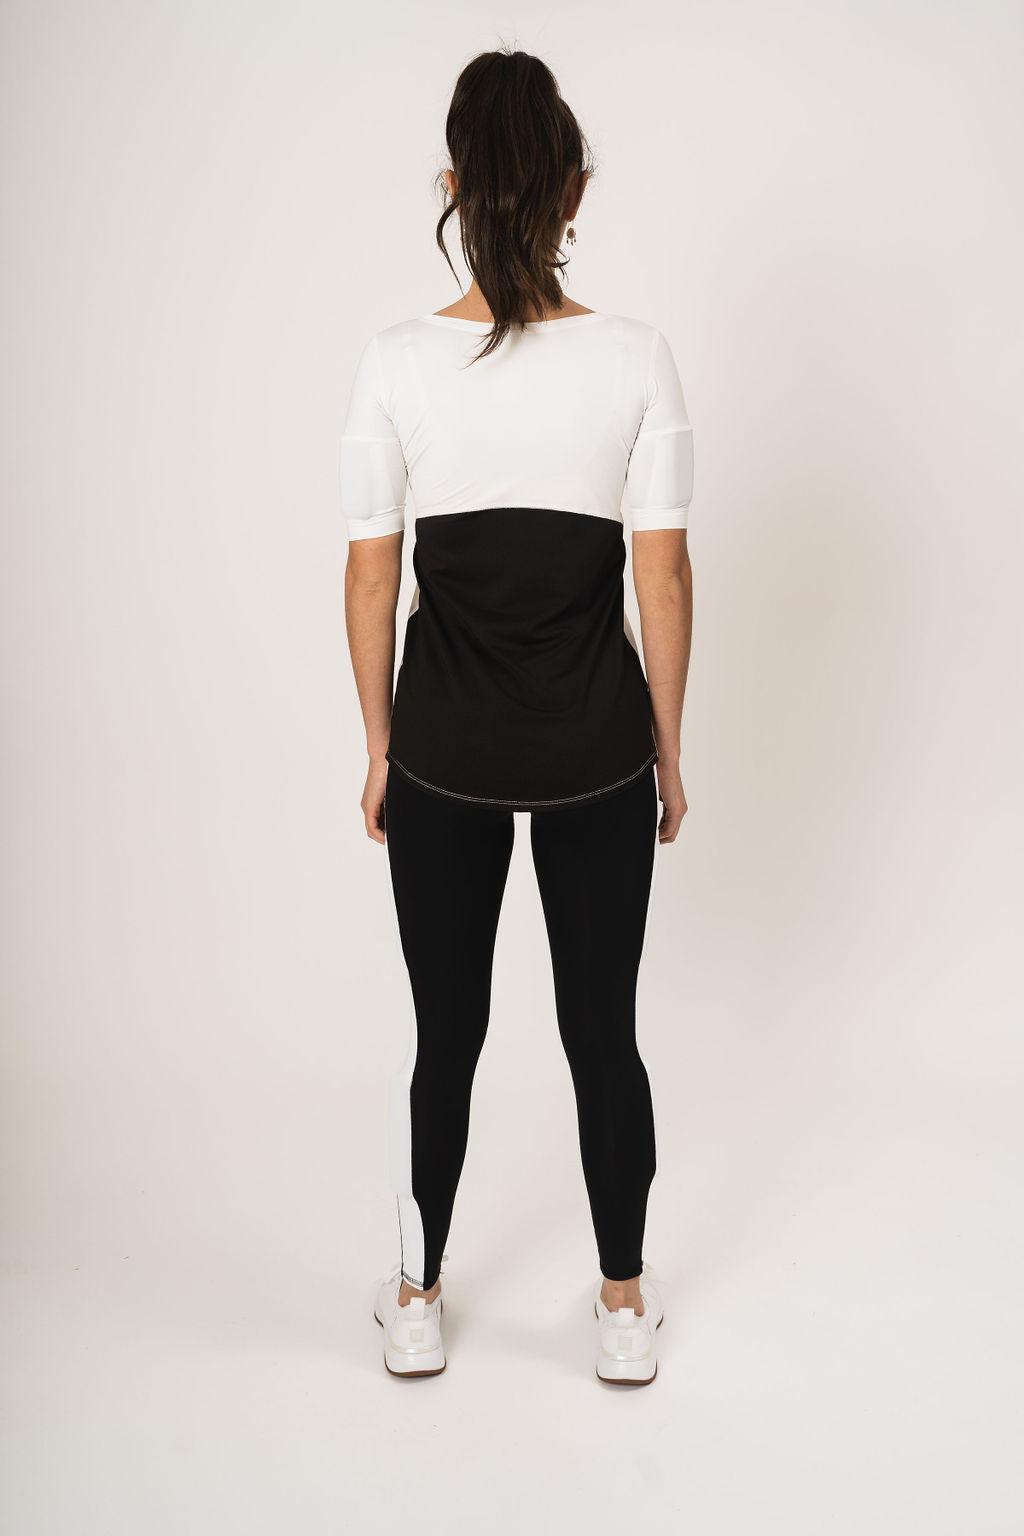 Rear view woman wearing the relaxed fit weighted short sleeve. The back has white at the top and black mesh halfway down the back. Weights are in the bicep arm pockets.